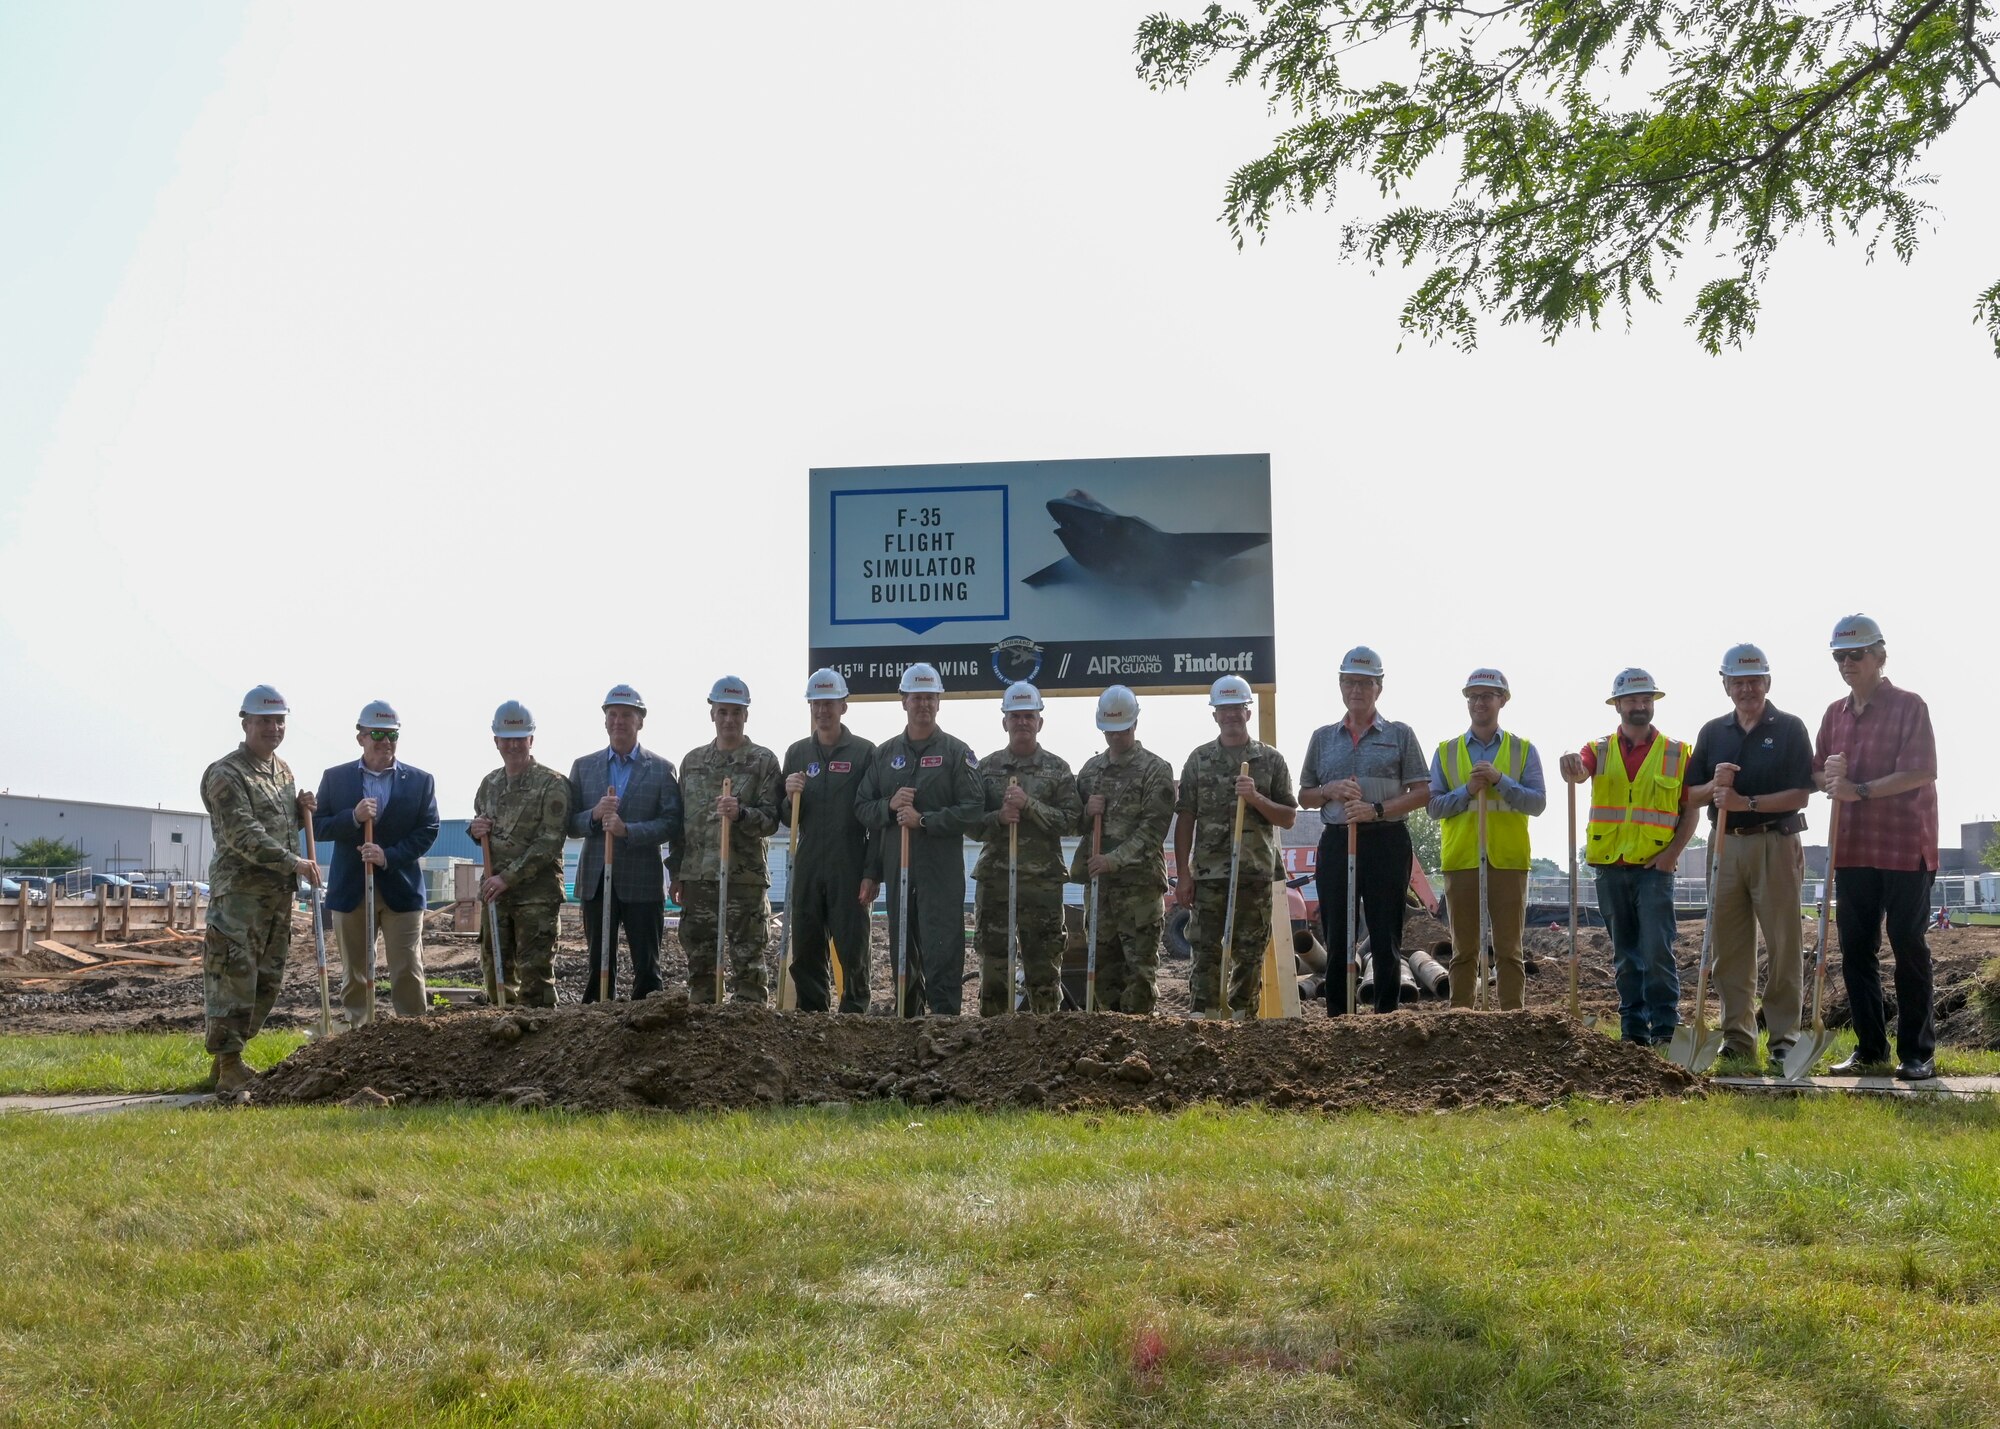 Leadership personnel from the Wisconsin Air National Guard and local organizations prepare to break ground Aug. 11, 2021 for the 115th Fighter Wing's first major project leading up to the beddown of the F-35 Lightning II at Truax Field. The ceremony brought together military and civilian leadership to commemorate the future of the Madison unit as the selected beddown site of the F-35 Lightning II aircraft. (U.S. Air National Guard photo by Staff Sgt. Cameron Lewis)